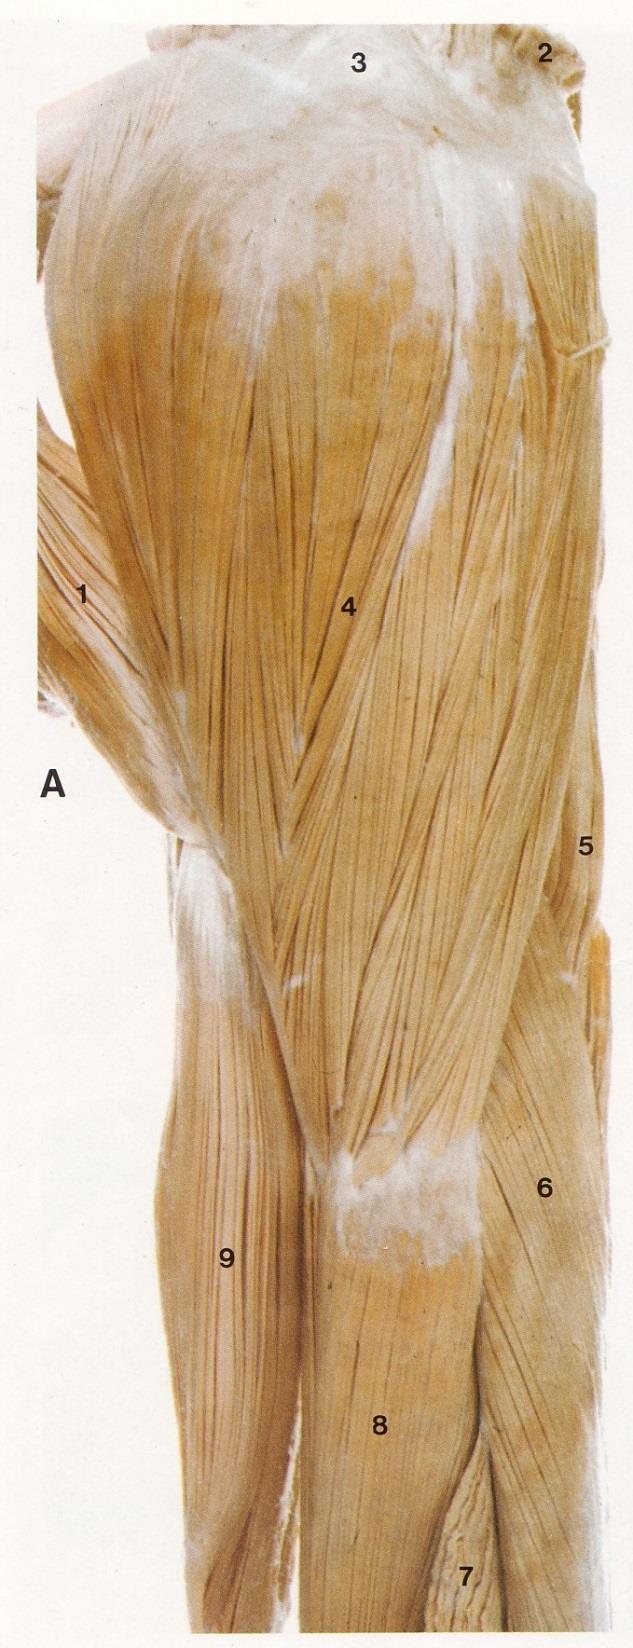 Middle L arm lateral Deltoid